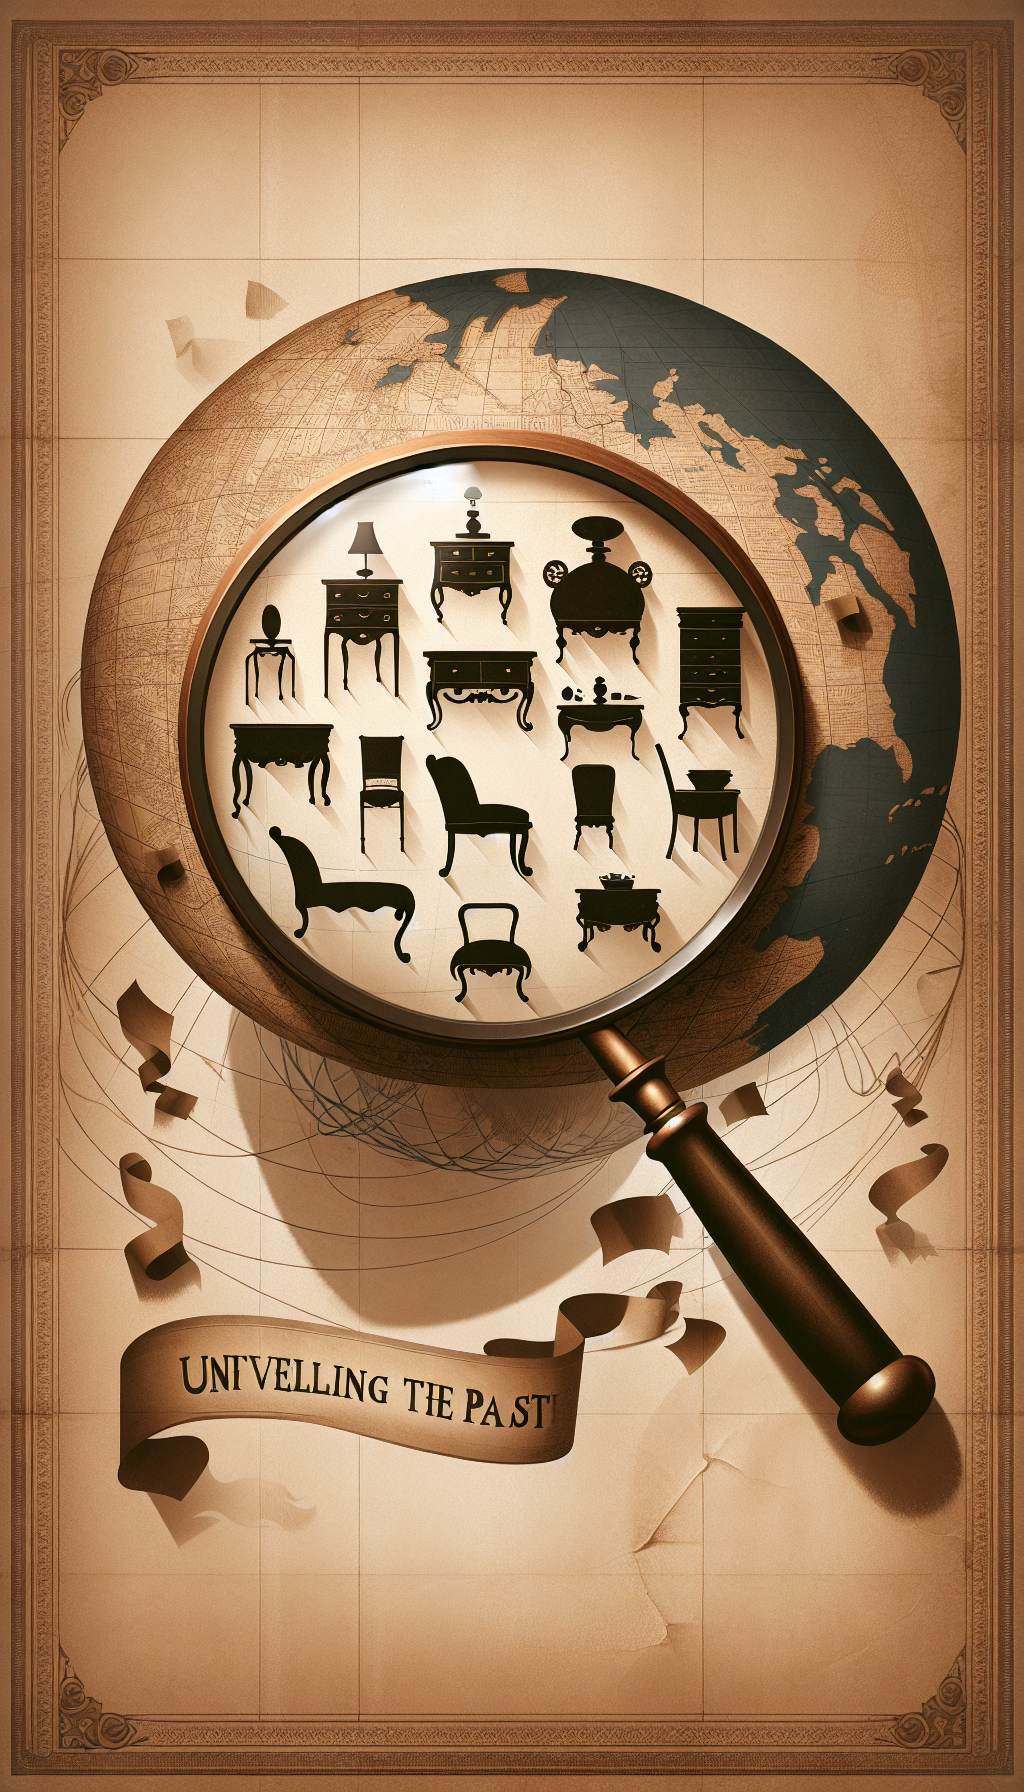 In a whimsical, sepia-toned scene, a magnifying glass looms large over a map dotted with vintage furniture silhouettes, each piece casting a shadow with an expert appraiser's silhouette. The map is wrapped around a globe, subtly hinting at local proximity. Above, a banner unfurls with the title "Unveiling the Past," completing this visualization of antique discovery and appraisal.